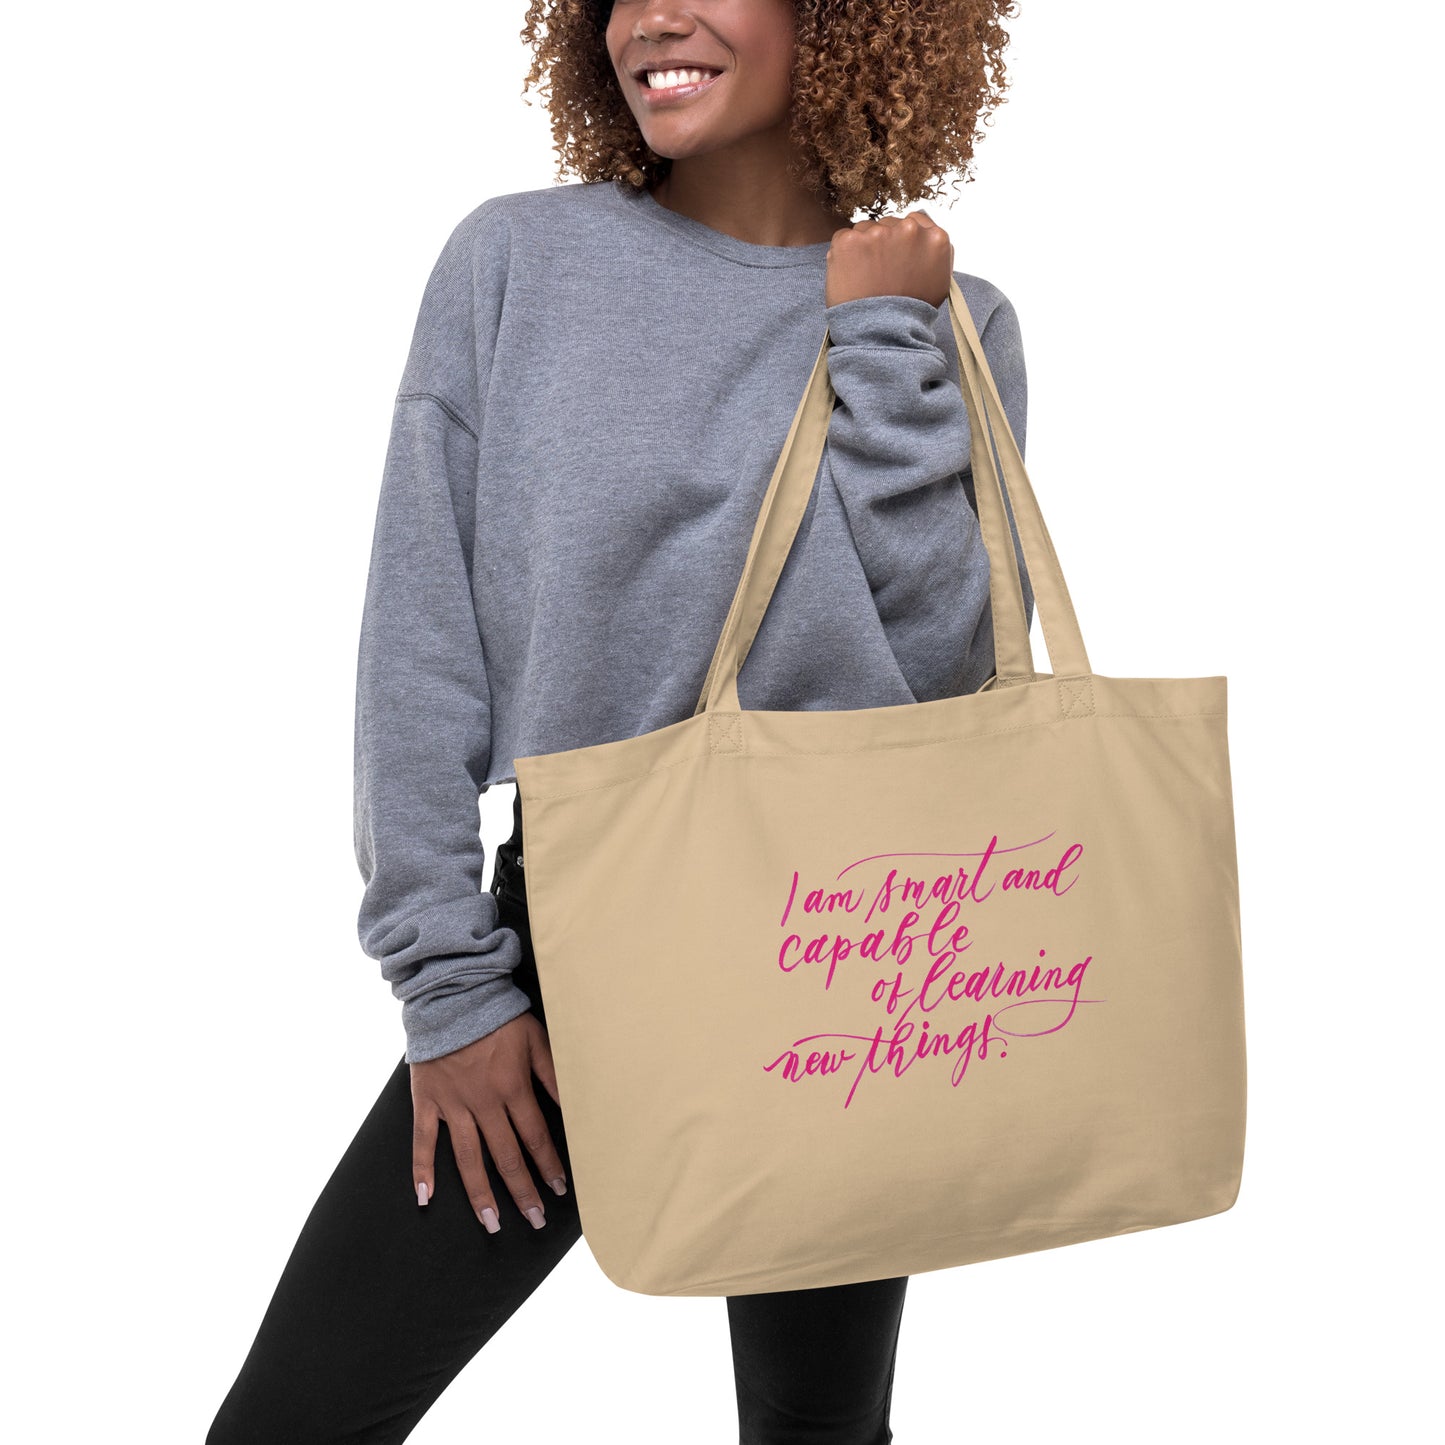 Growth Mindset Tote - "I am smart..." Calligraphy Printed on Certified Organic Cotton Canvas LARGE Tote Bag - I am Empowered #04